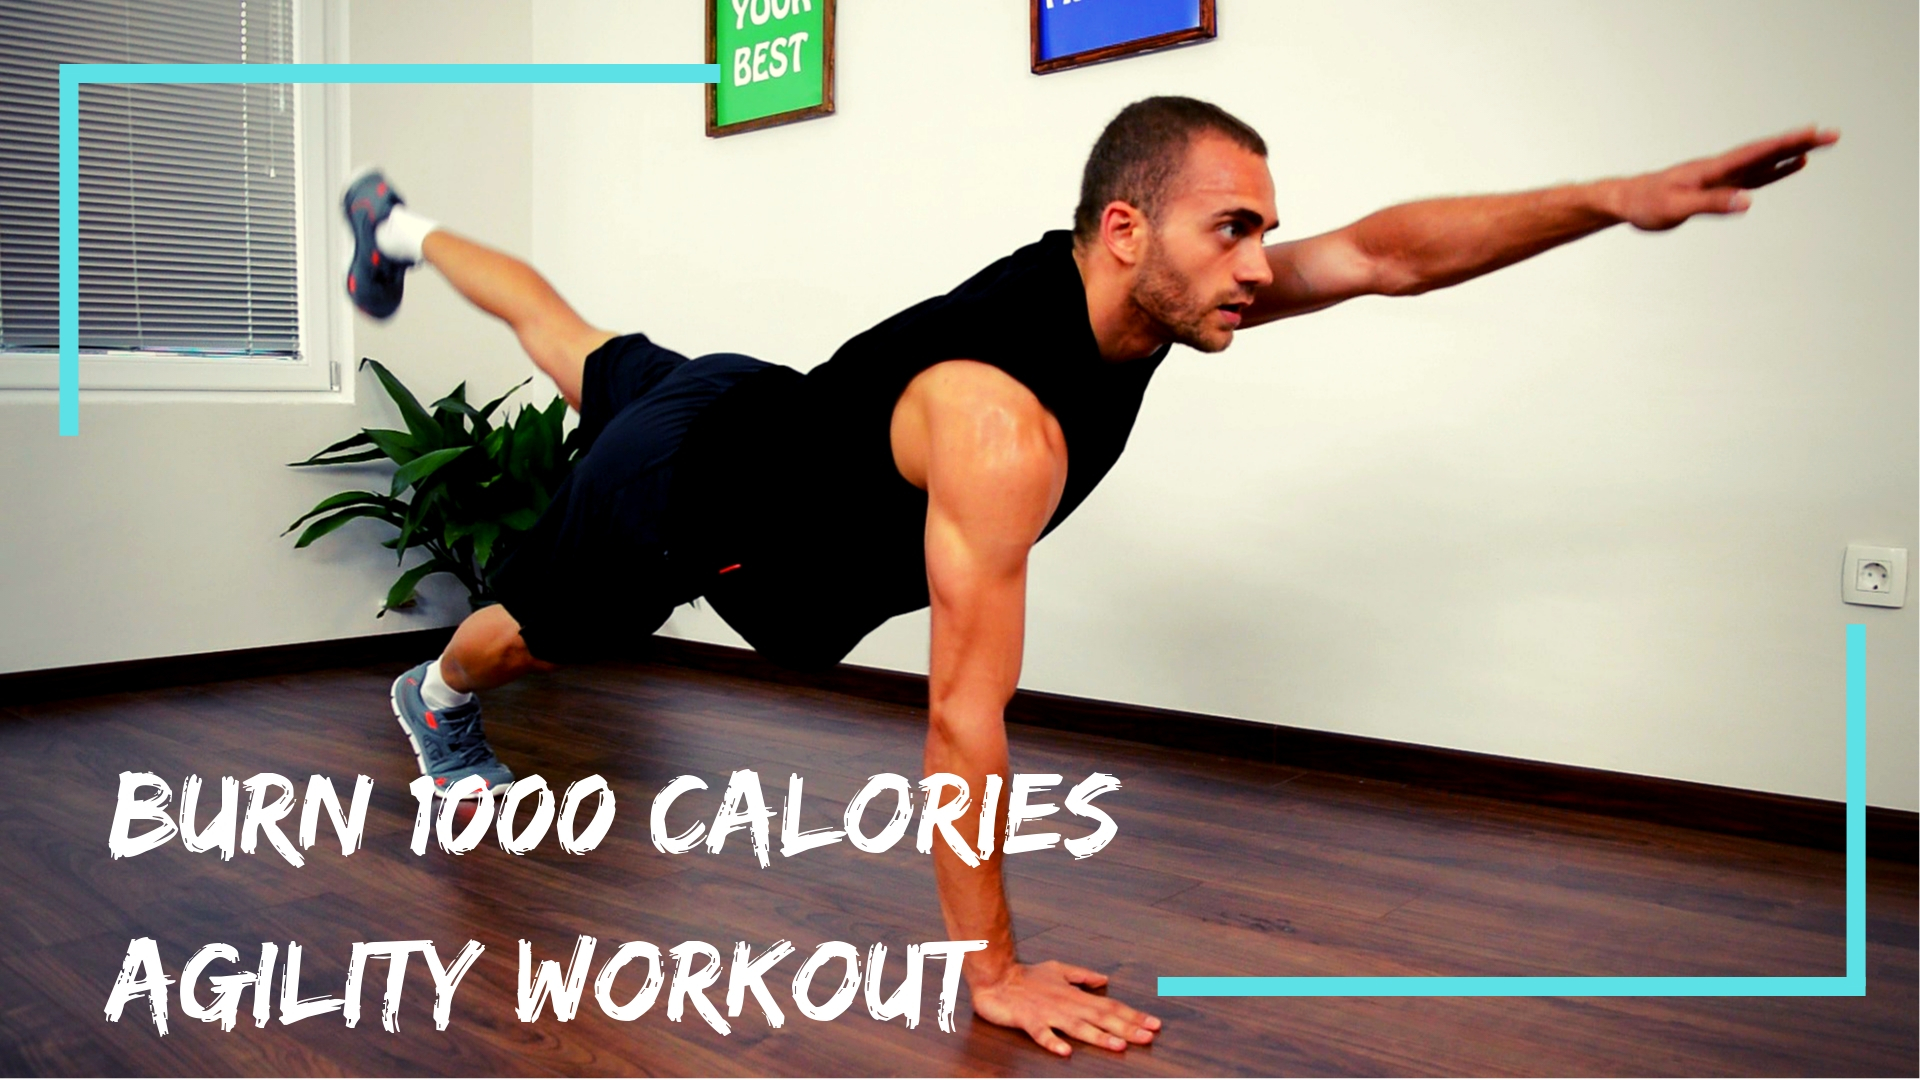 Advanced Full Body Workout at Home Without Equipment